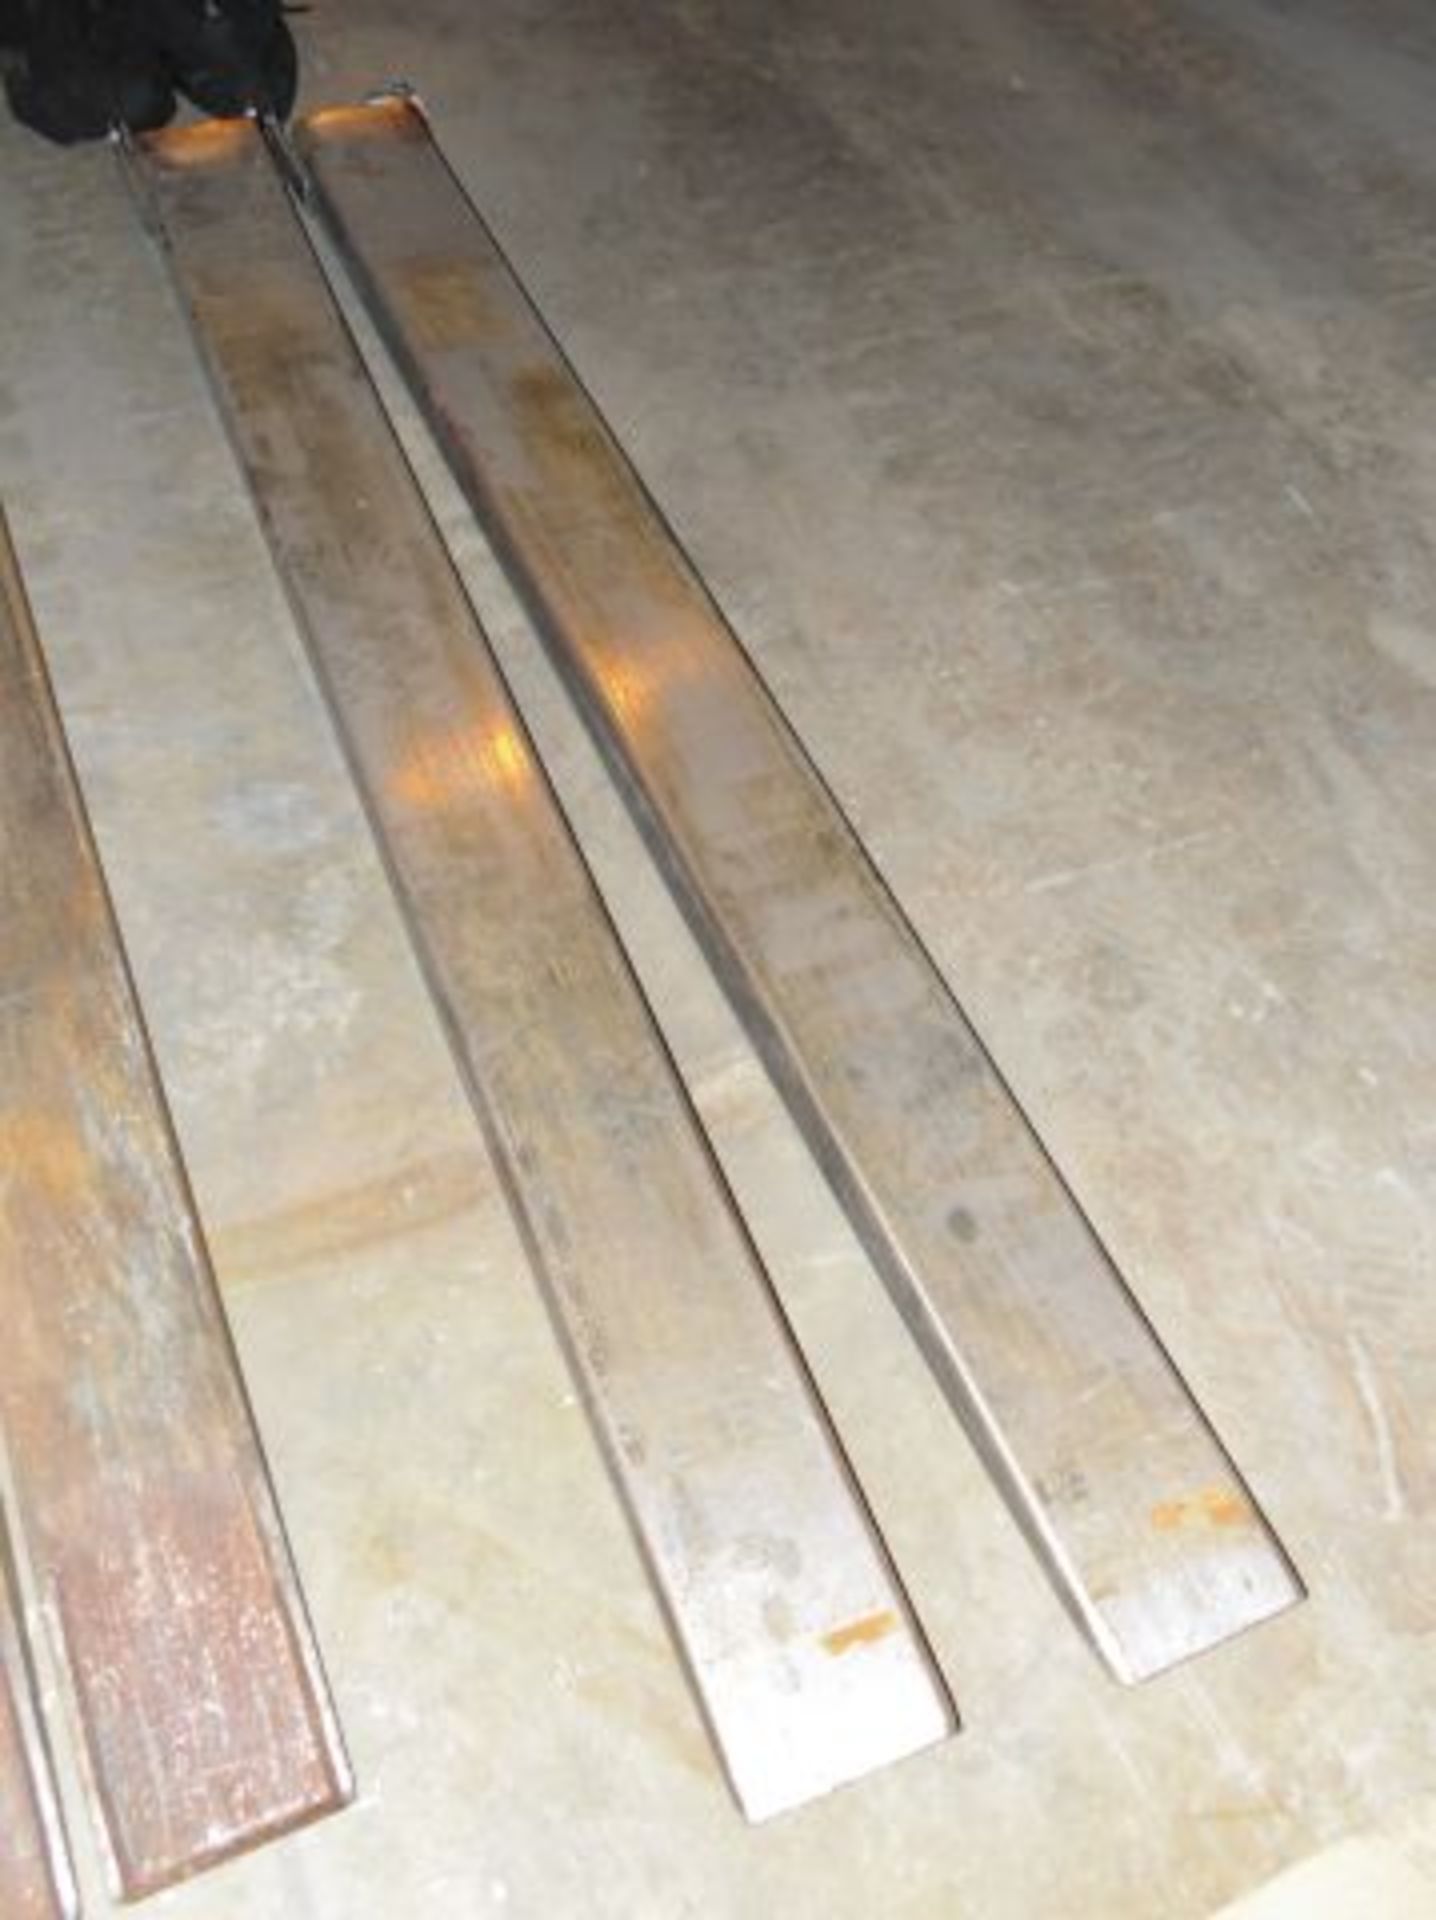 * Pair of Forklift Extension Tines; Length 2200mm; Width 1700mm. Loaded onto Buyer's Transport